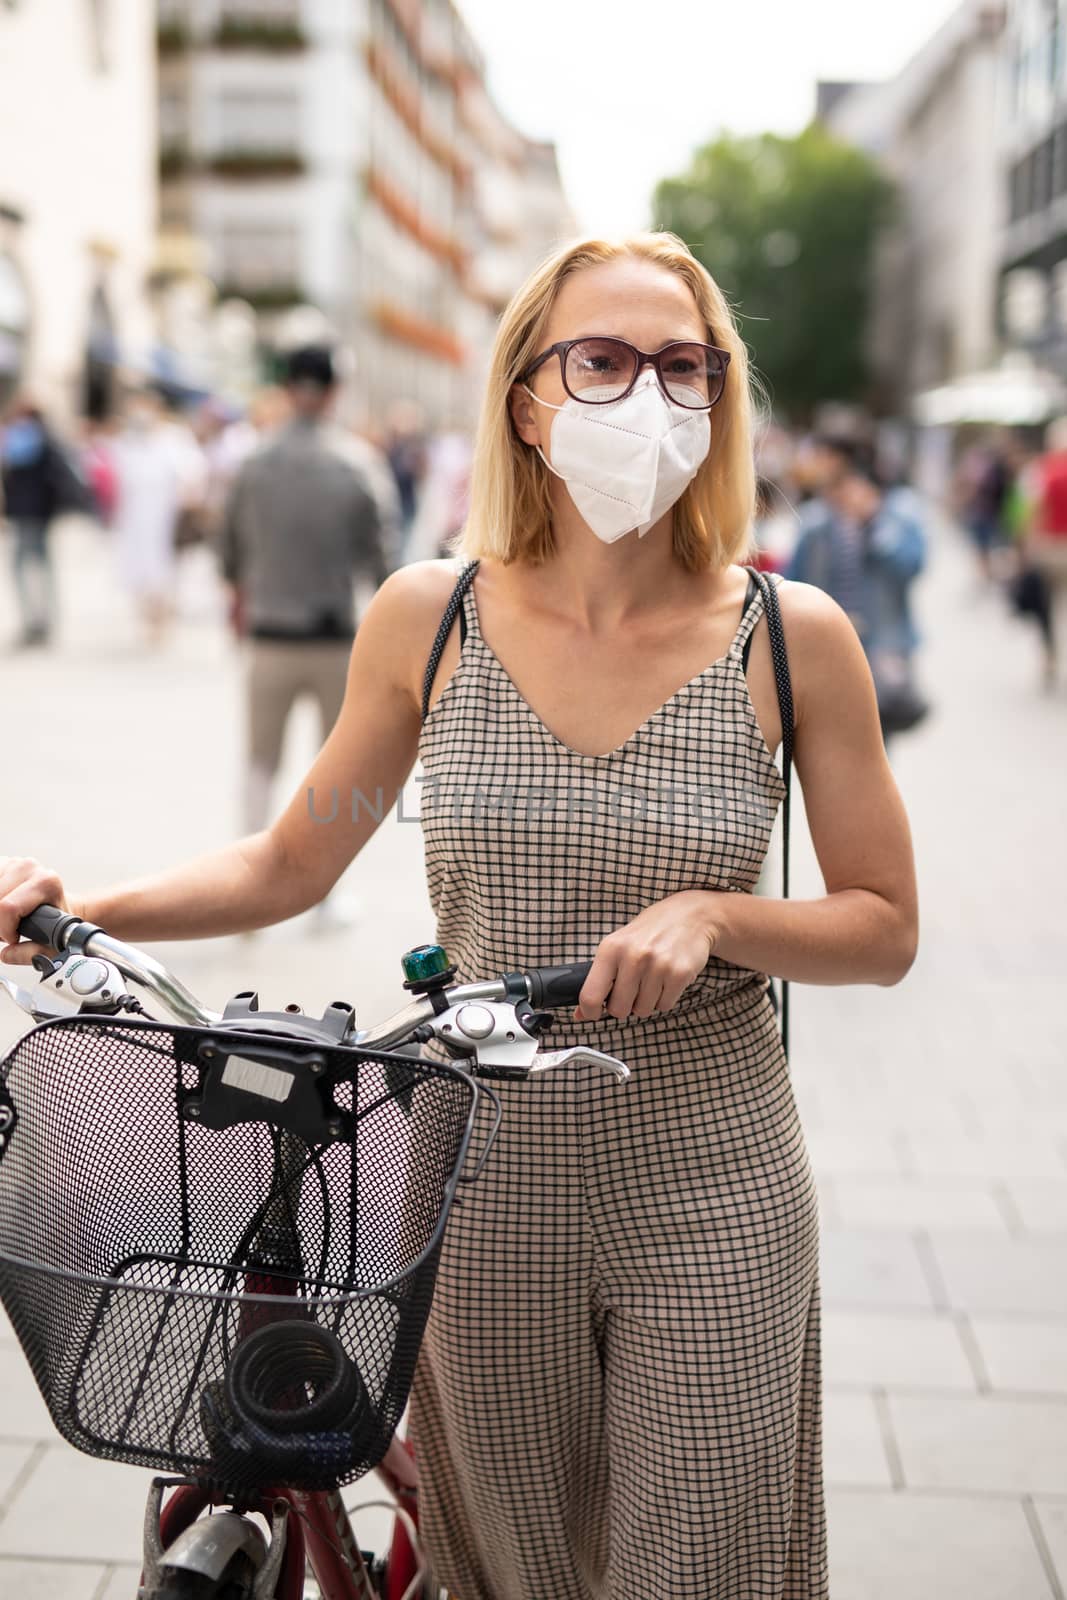 Woman walking by her bicycle on pedestrian city street wearing medical face mask in public to prevent spreading of corona virus. New normal during covid epidemic. by kasto